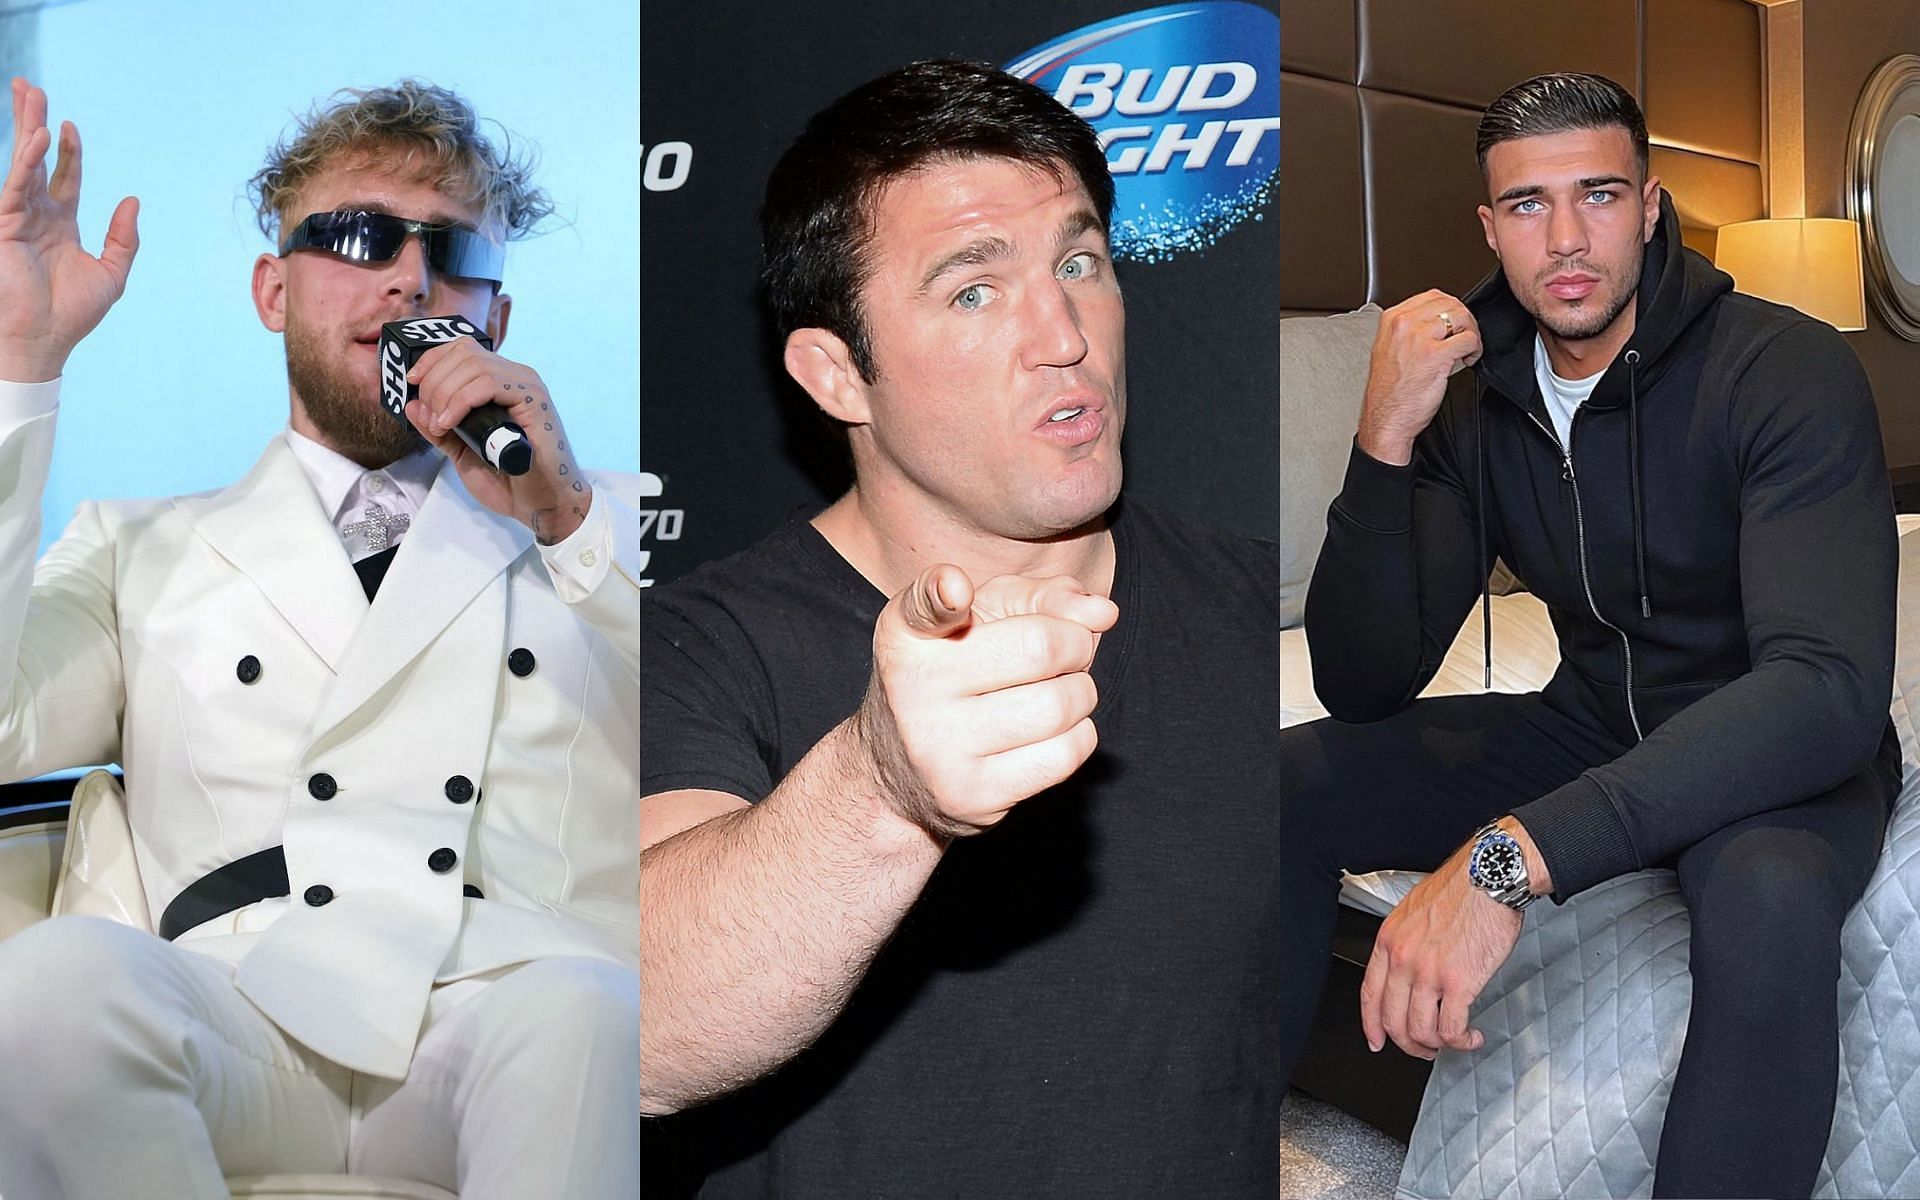 Jake Paul (left), Chael Sonnen (center) and Tommy Fury (right) [Image Credits- @tommyfury on Instagram]